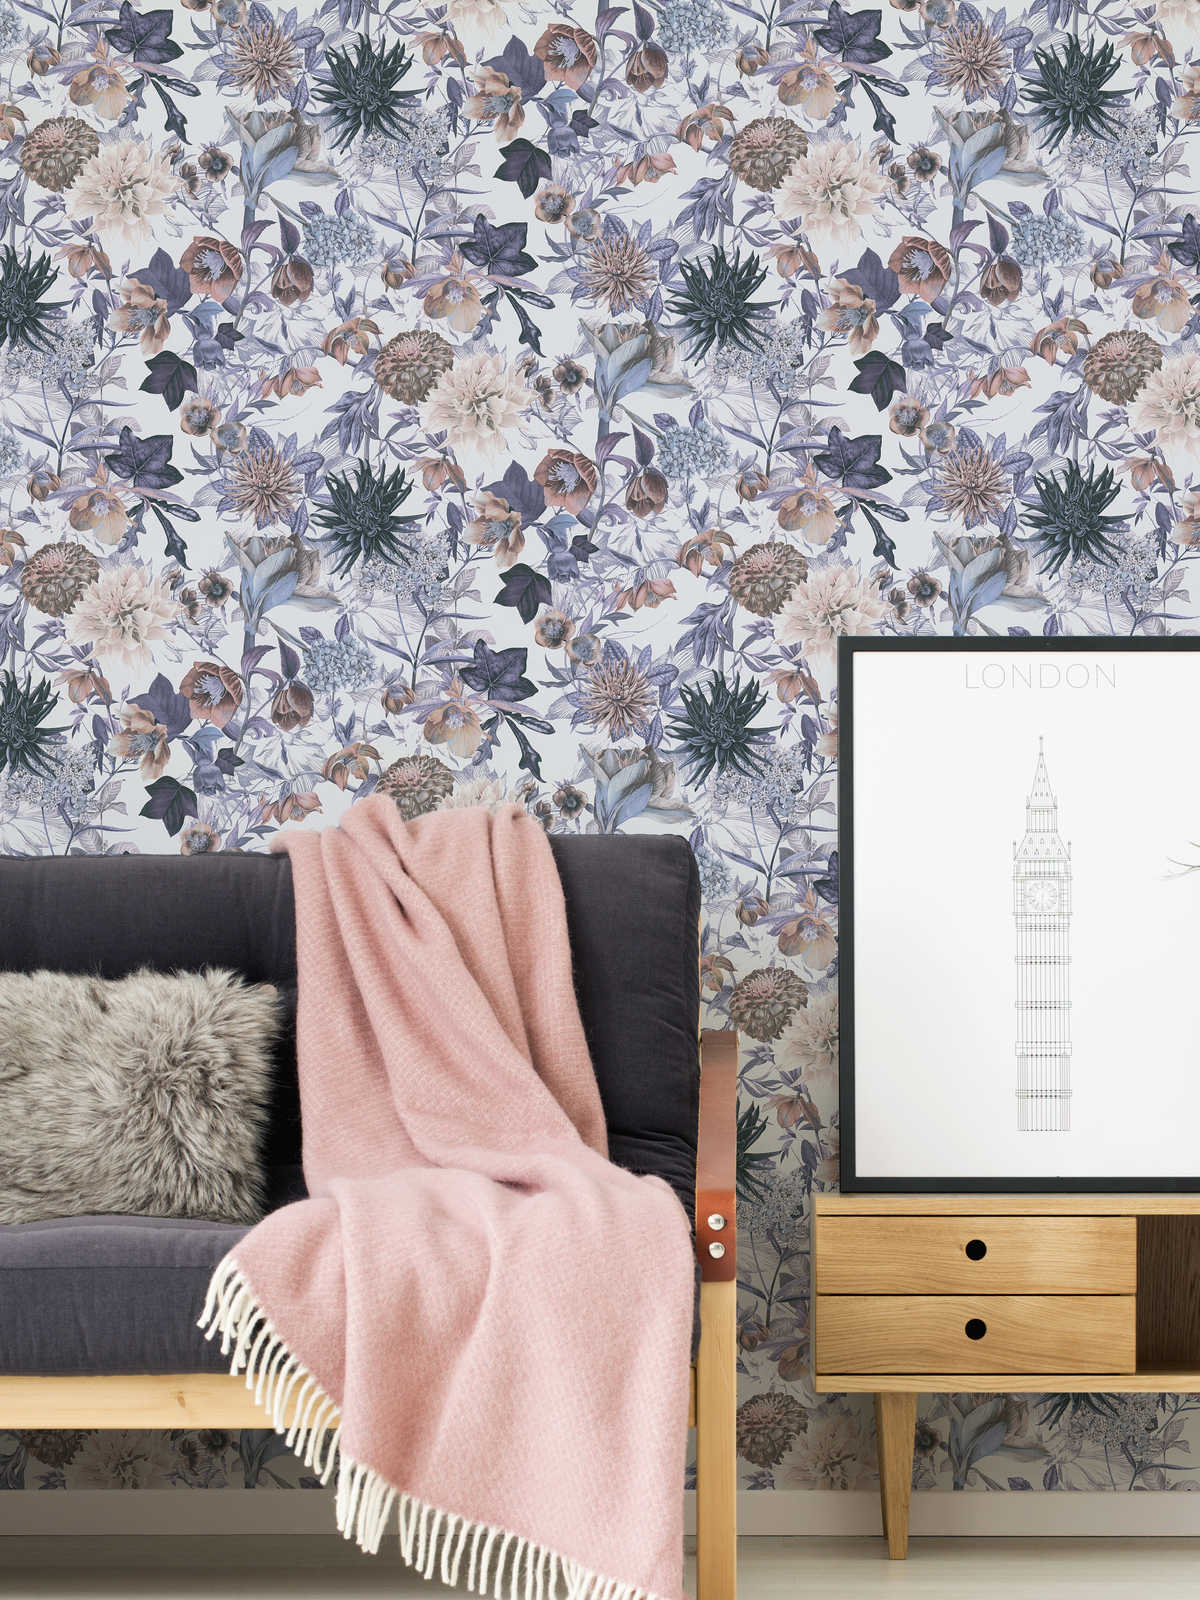             Floral wallpaper with floral pattern - blue, brown, grey
        